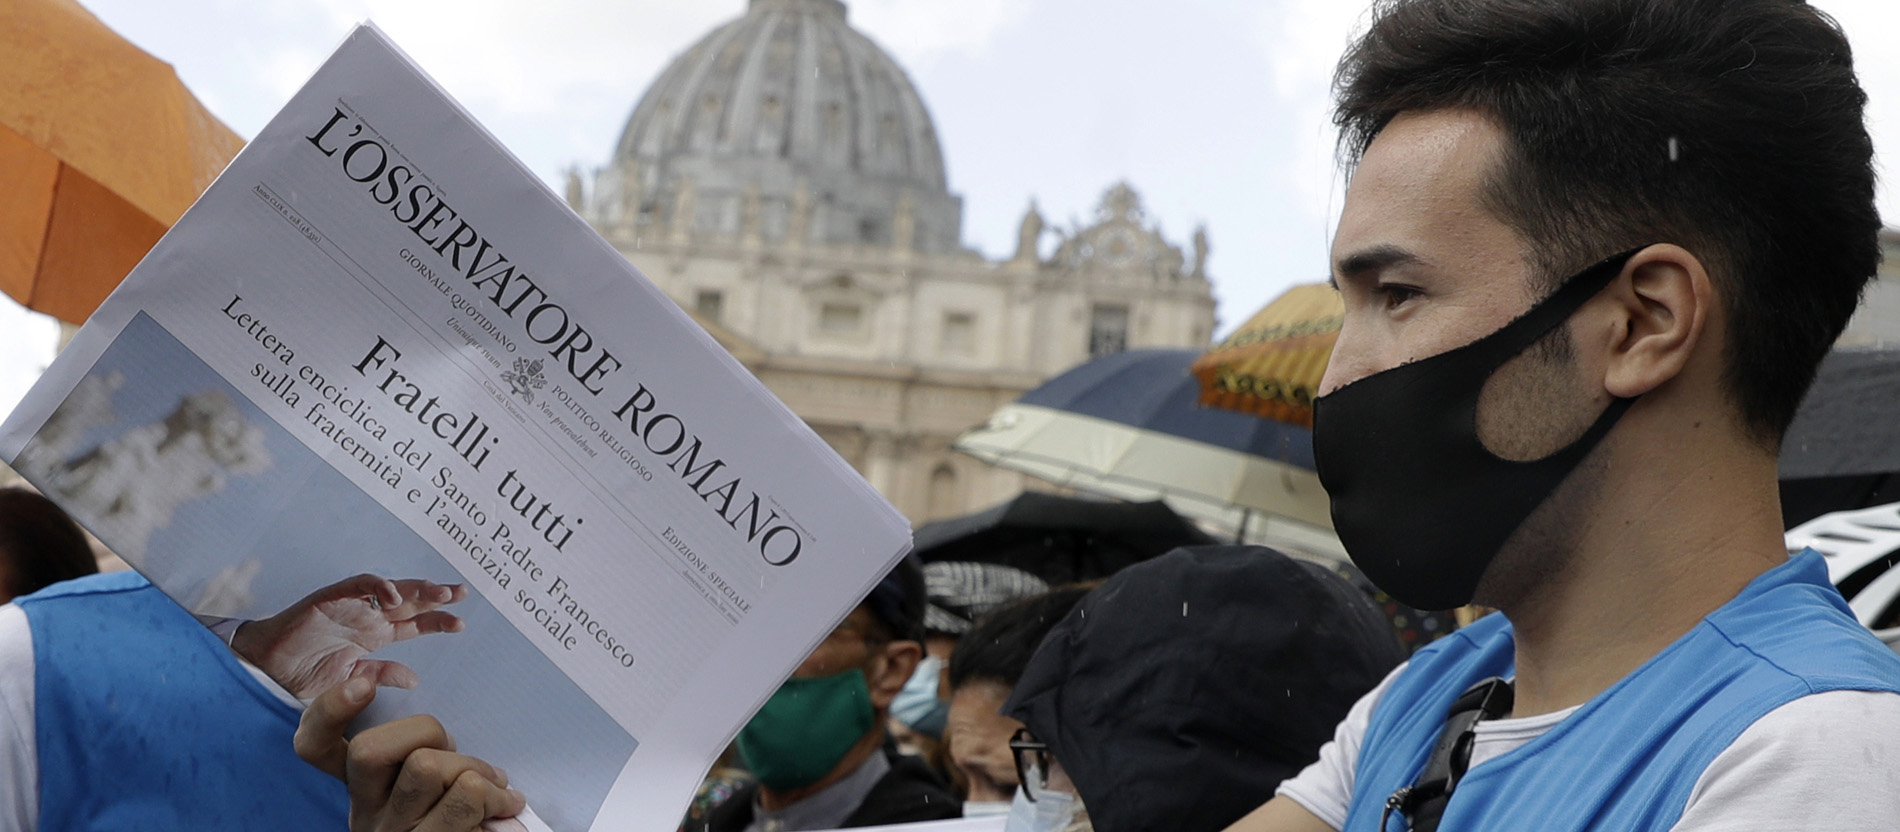 Free copies of the Vatican newspaper L'Osservatore Romano with the front page about Pope Francis' encyclical "All Brothers" are distributed by volunteers to faithful at the end of the Angelus noon prayer in St. Peter's Square at the Vatican, Sunday, Oct. 4, 2020. Francis on Sunday laid out his vision for a post-COVID world by uniting the core elements of his social teachings into a new encyclical, “Fratelli Tutti” (Brothers All), which was released on the feast day of his namesake, the peace-loving St. Francis of Assisi. (AP Photo/Gregorio Borgia)